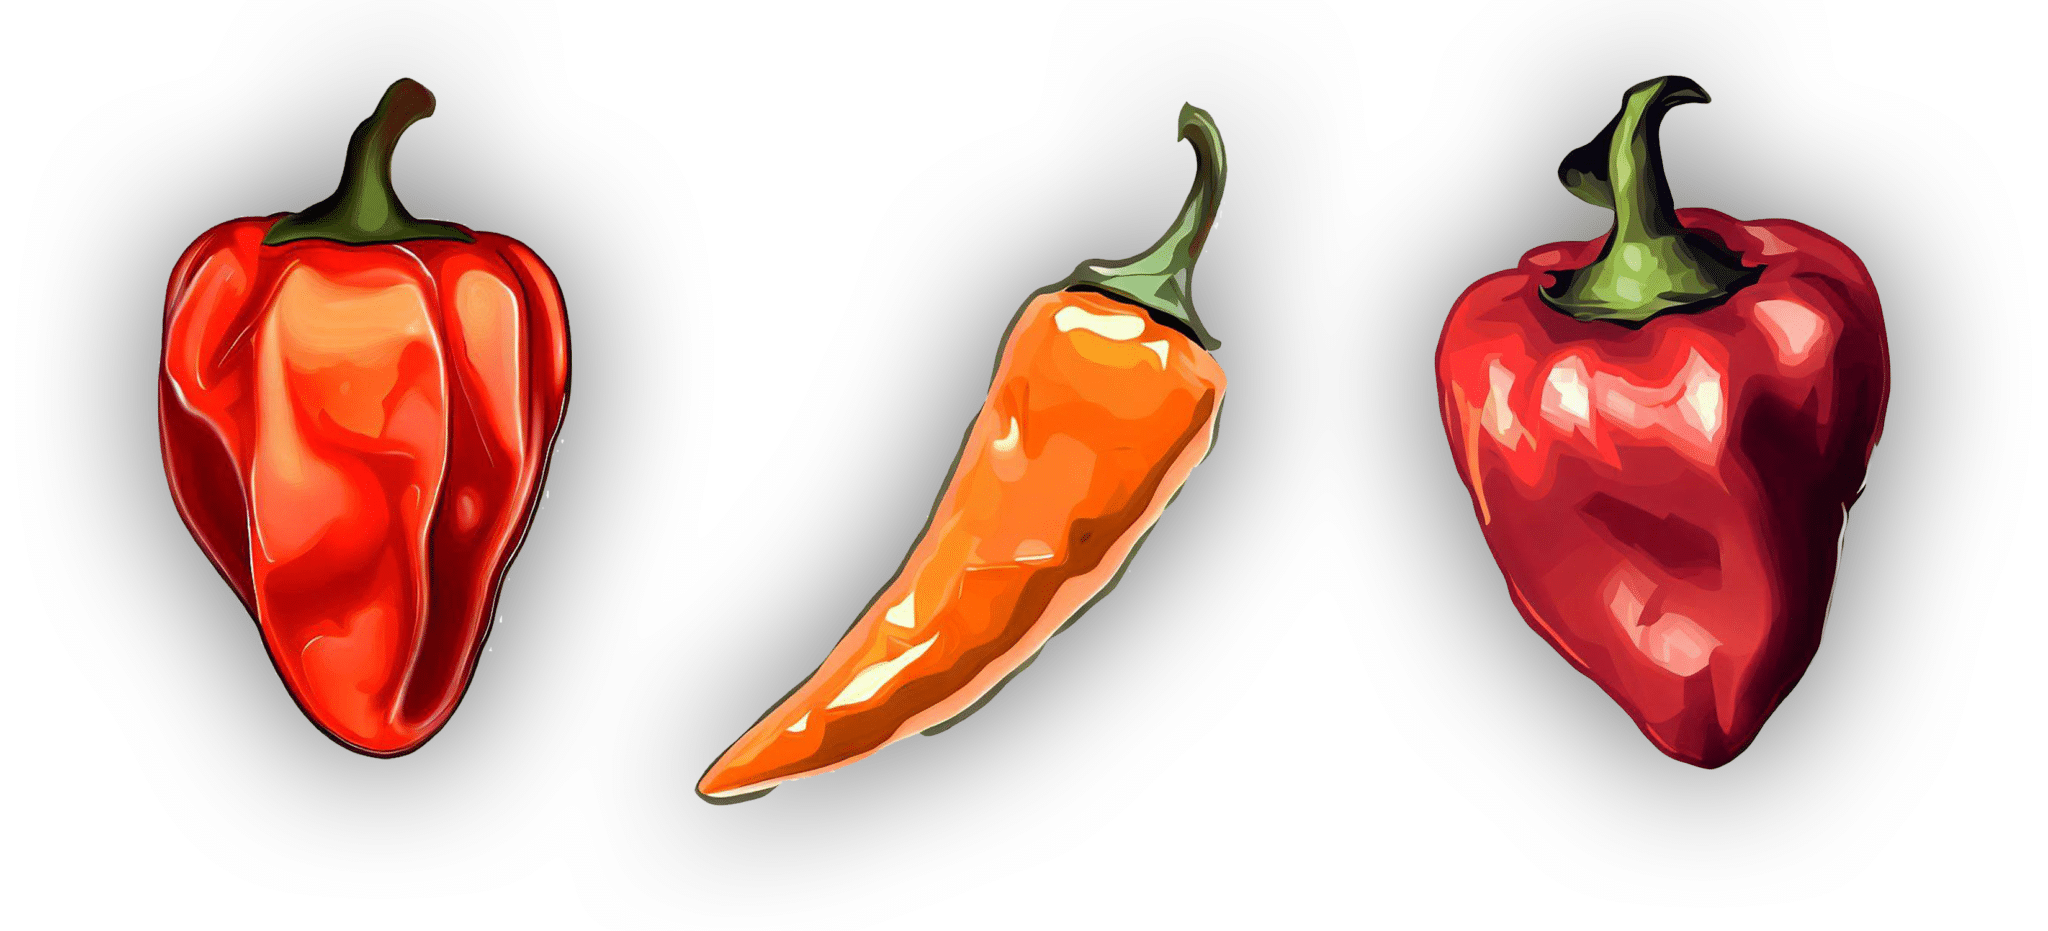 Three colorful spicy peppers illustration.